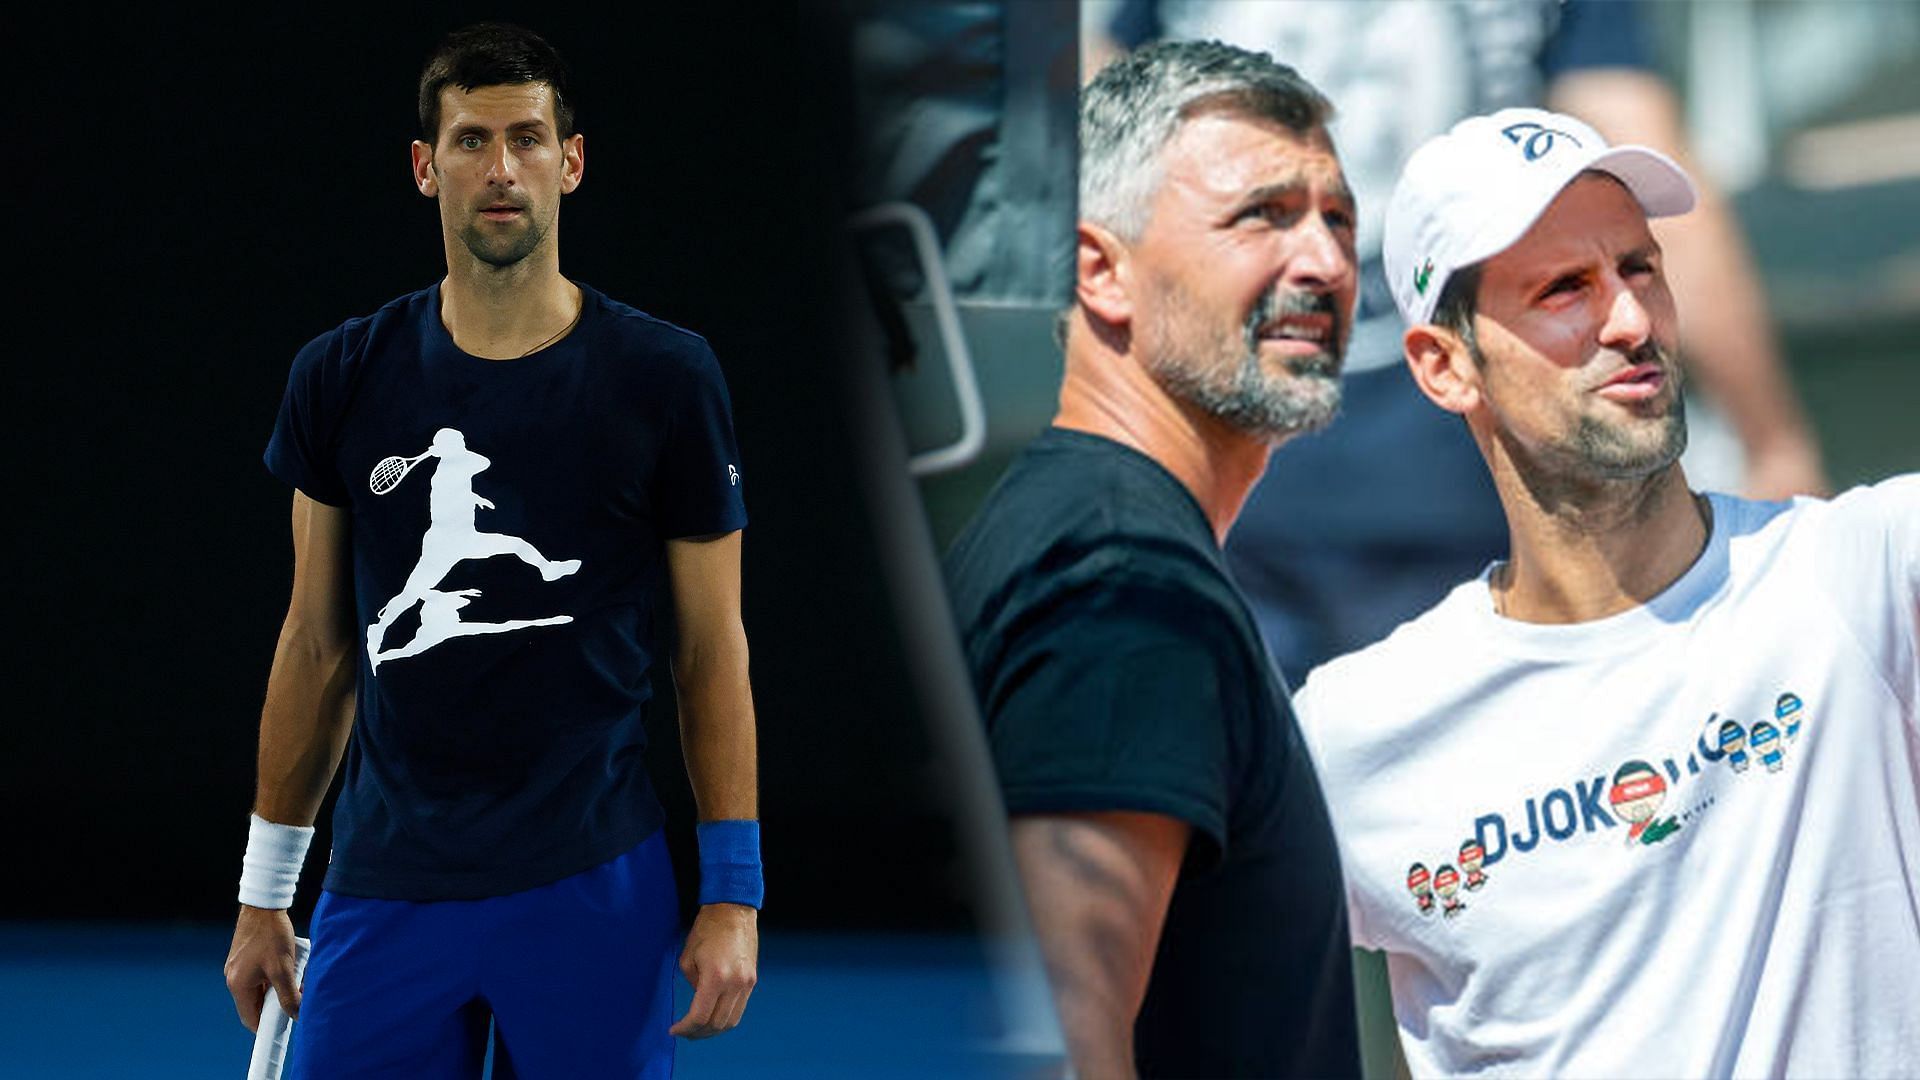 Djokovic parted ways with Ivanisevic as his coach recently